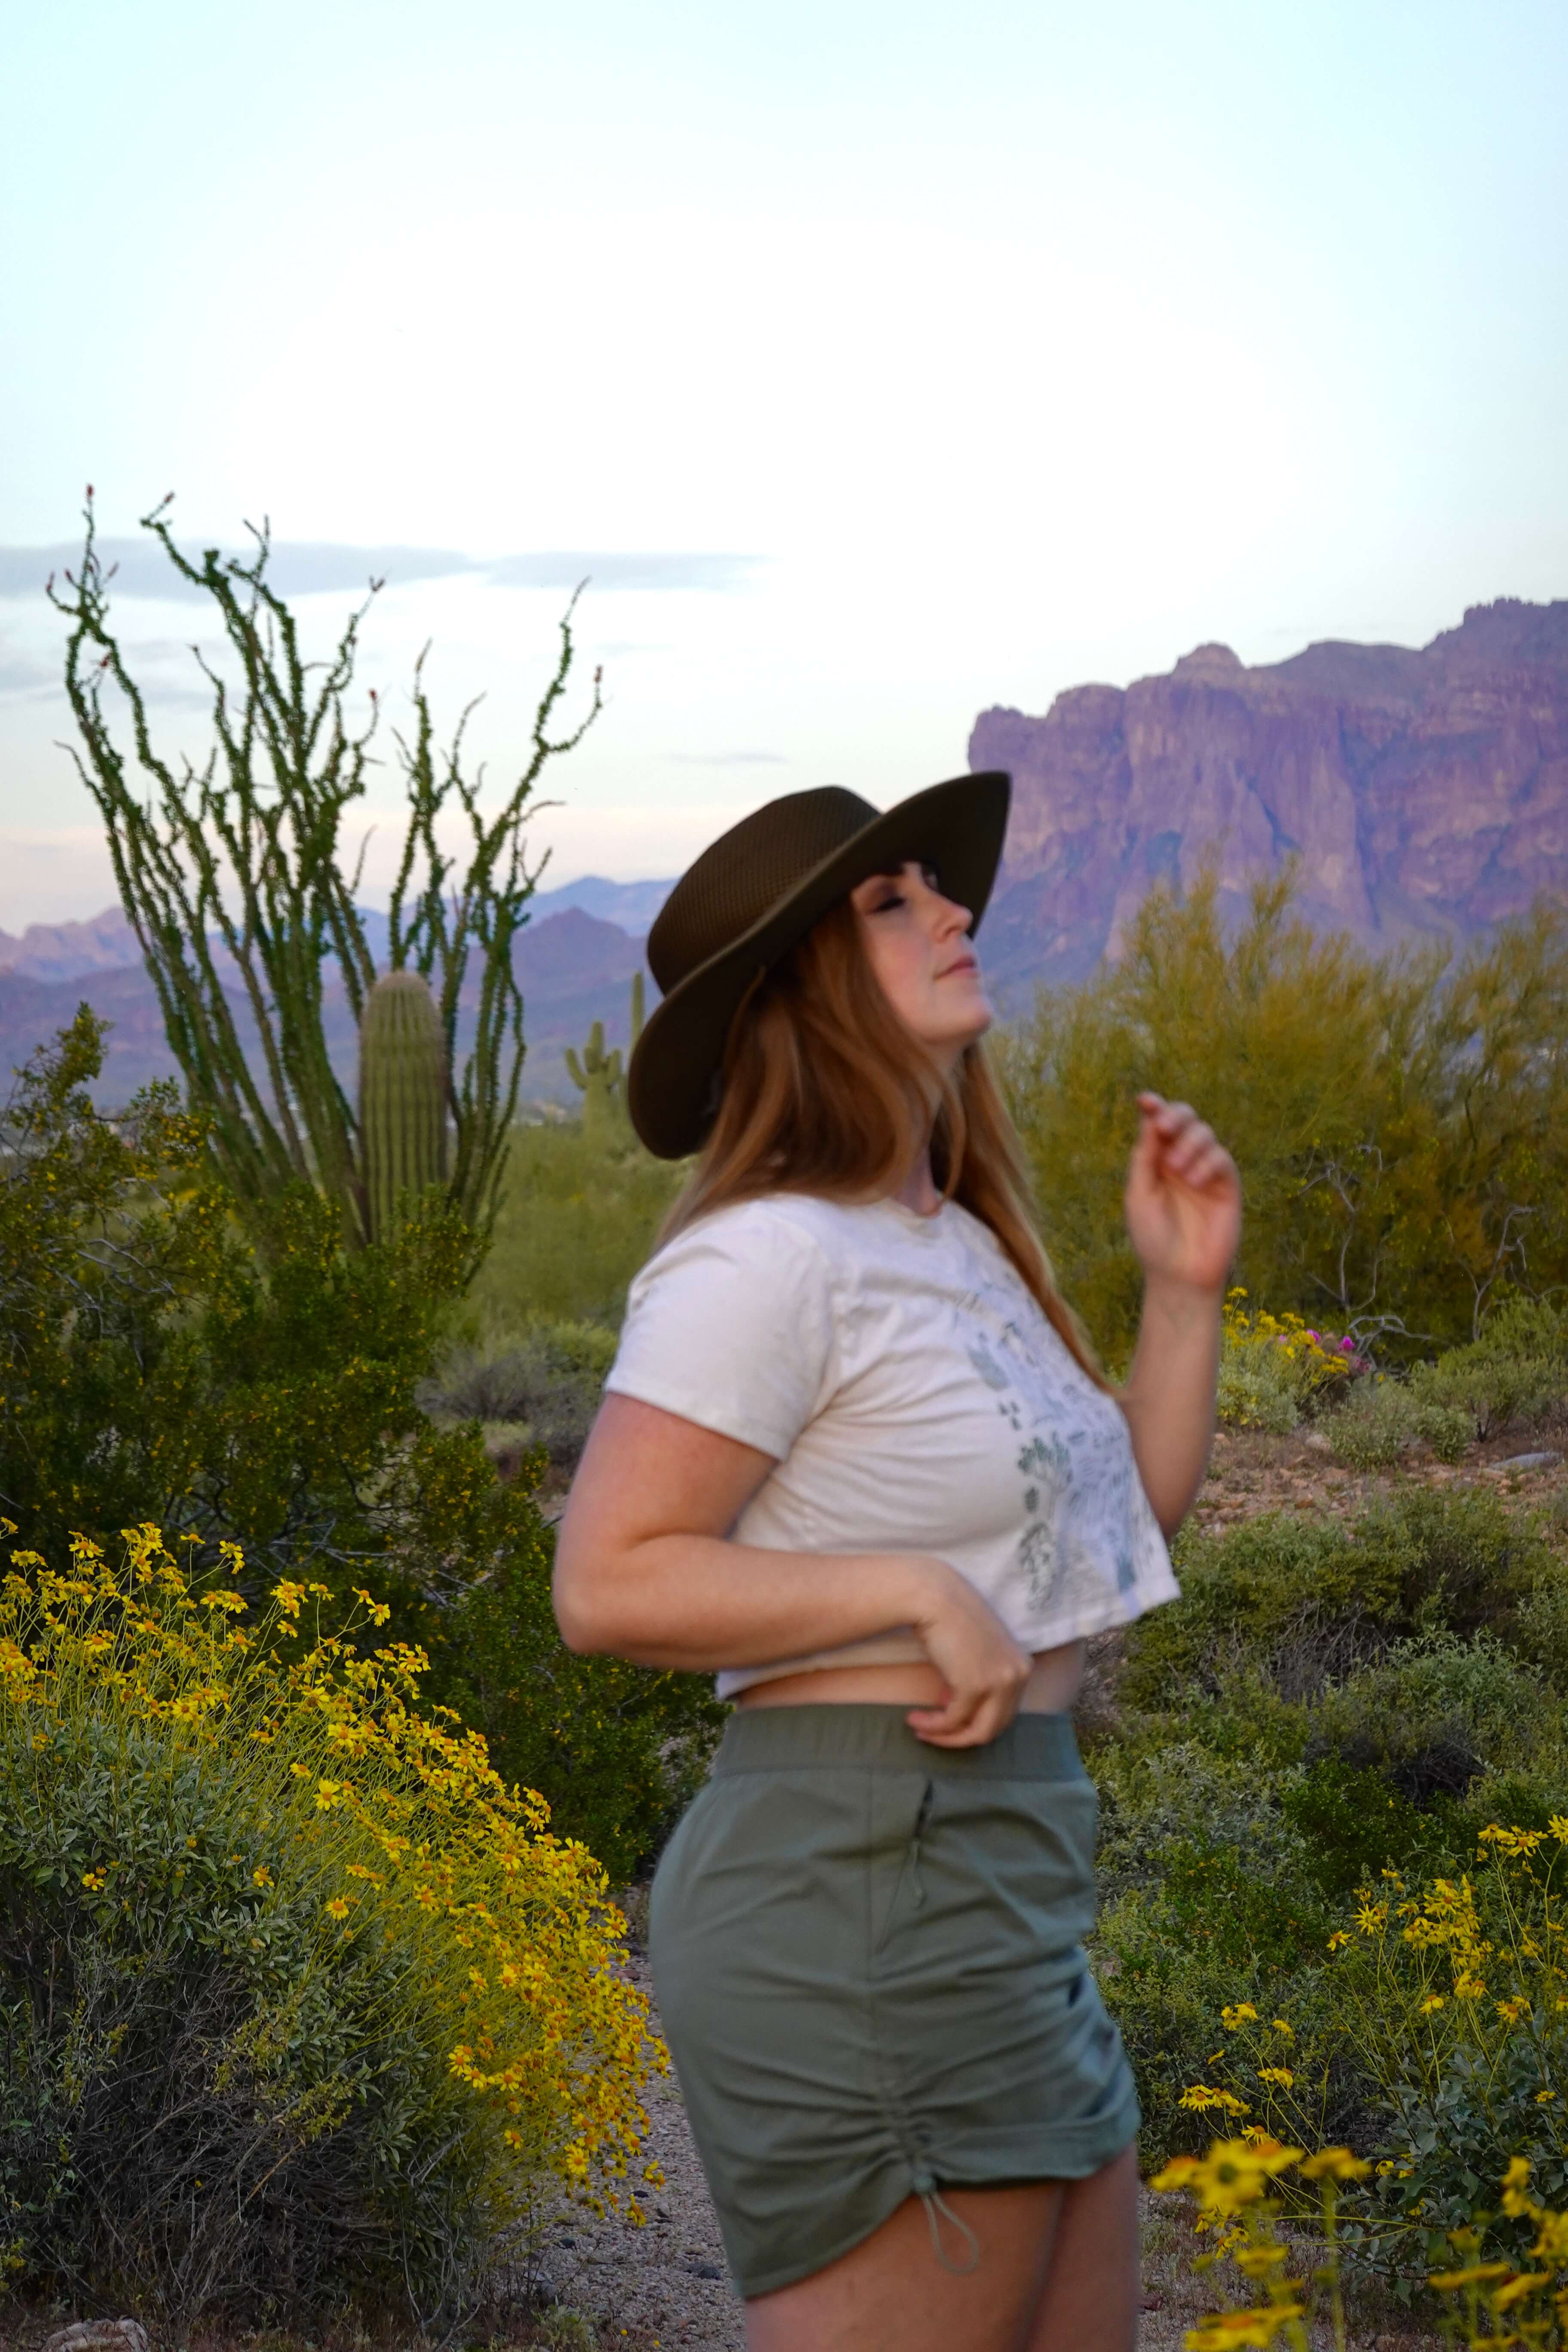 Summer Hiking Outfits That Will Make You Stand Out on the Trails (& in Your Photos!)